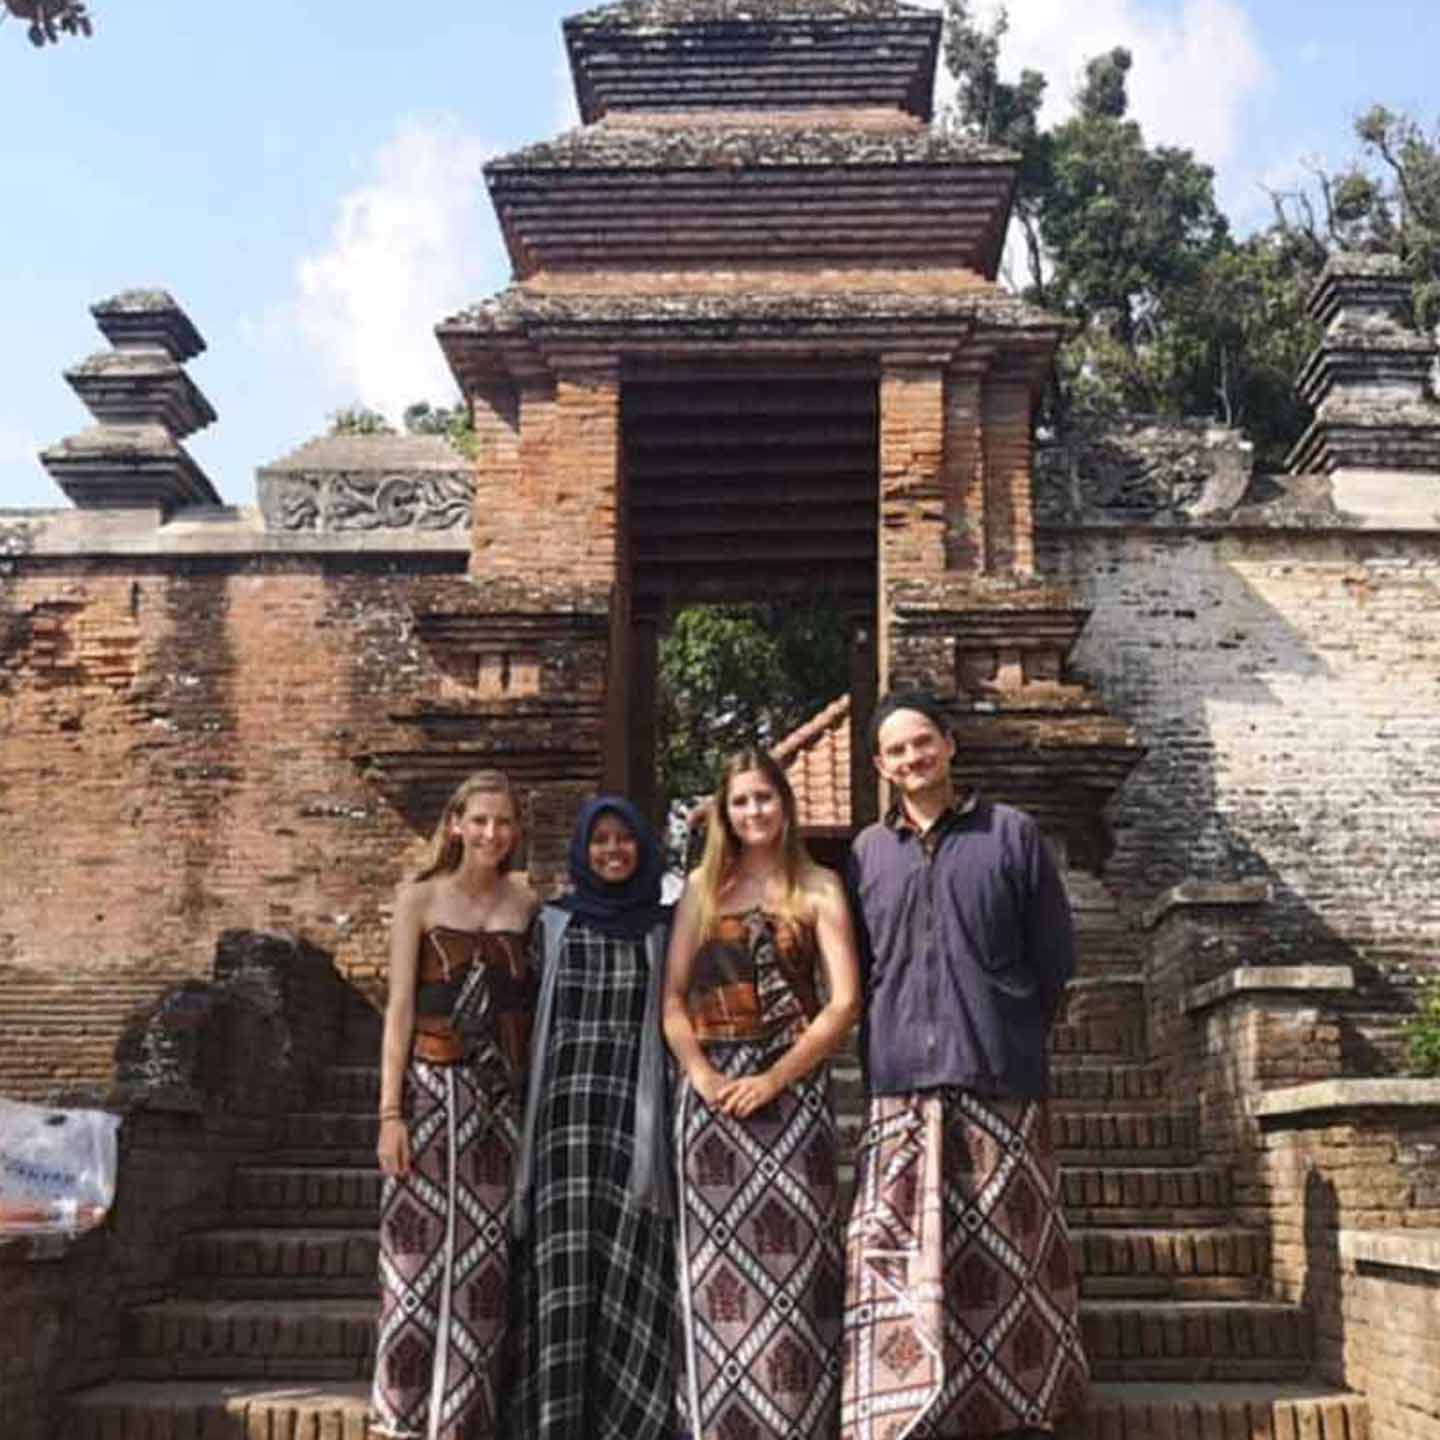 Visiting Yogyakarta's historic royal Cemetry, we had to wear traditional Javanese clothing in order to enter